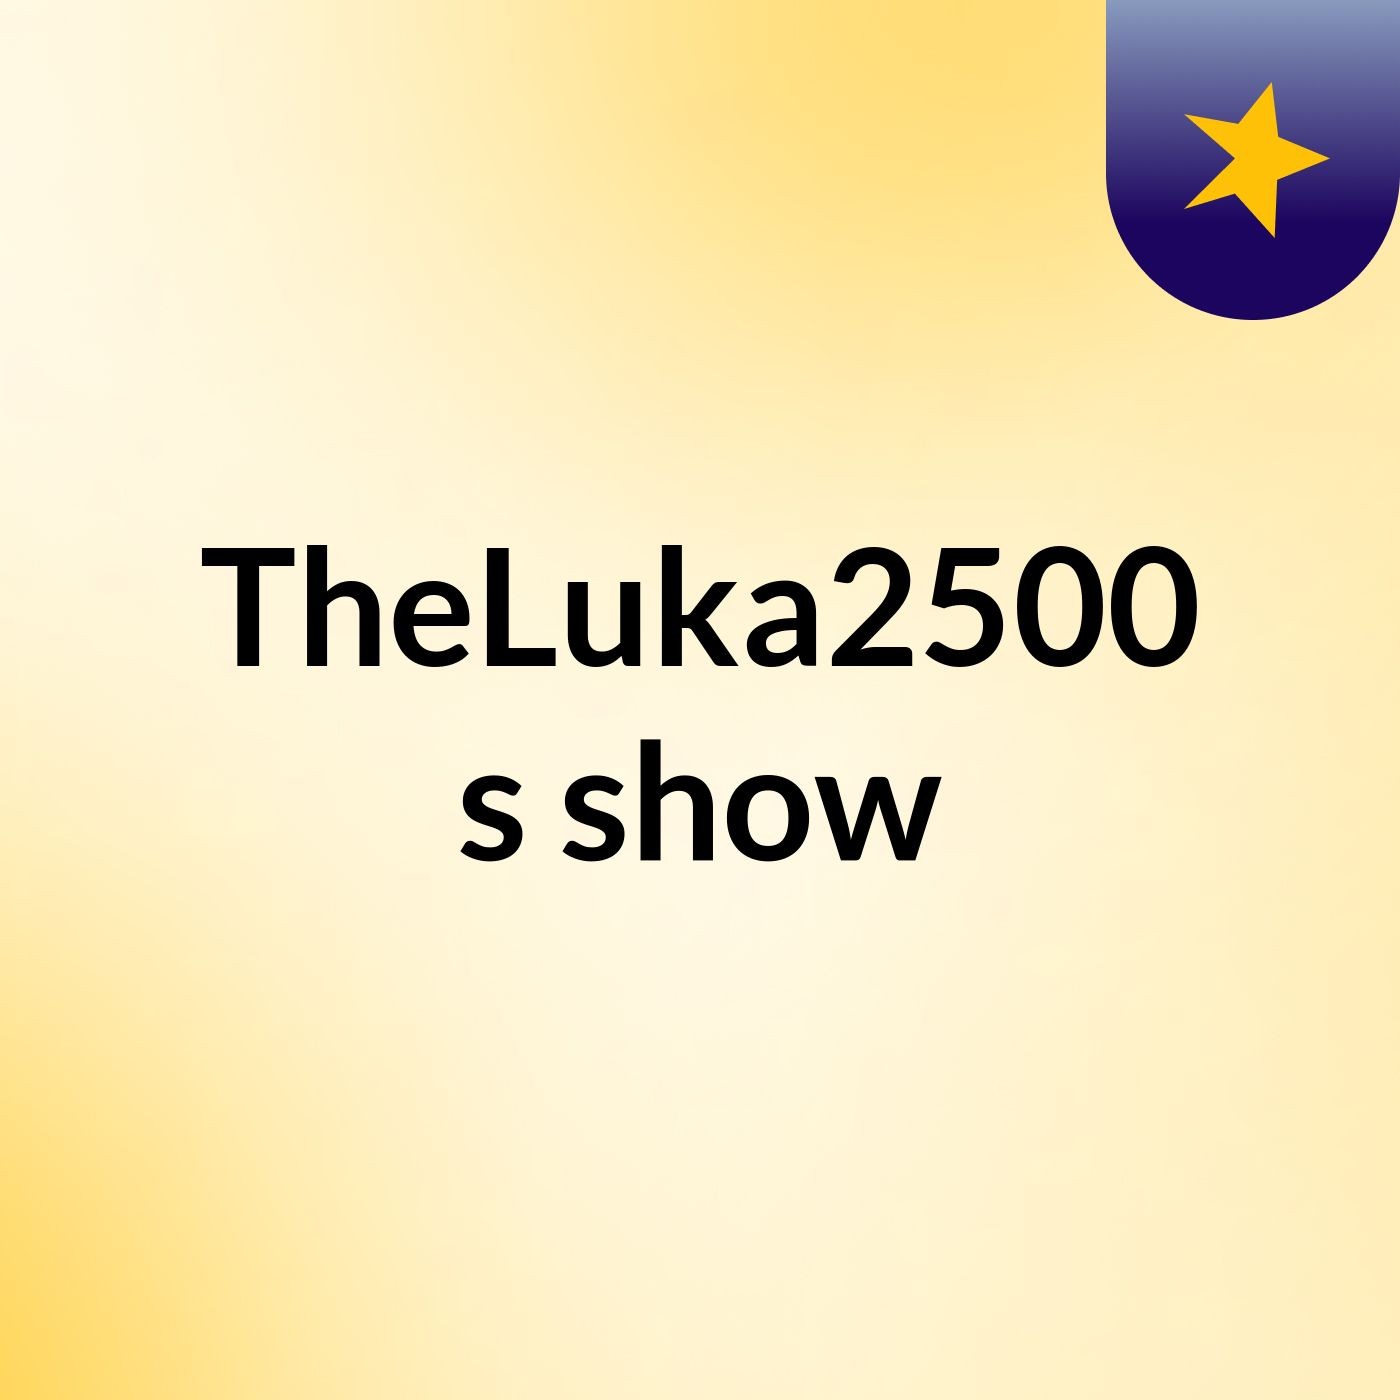 TheLuka2500's show